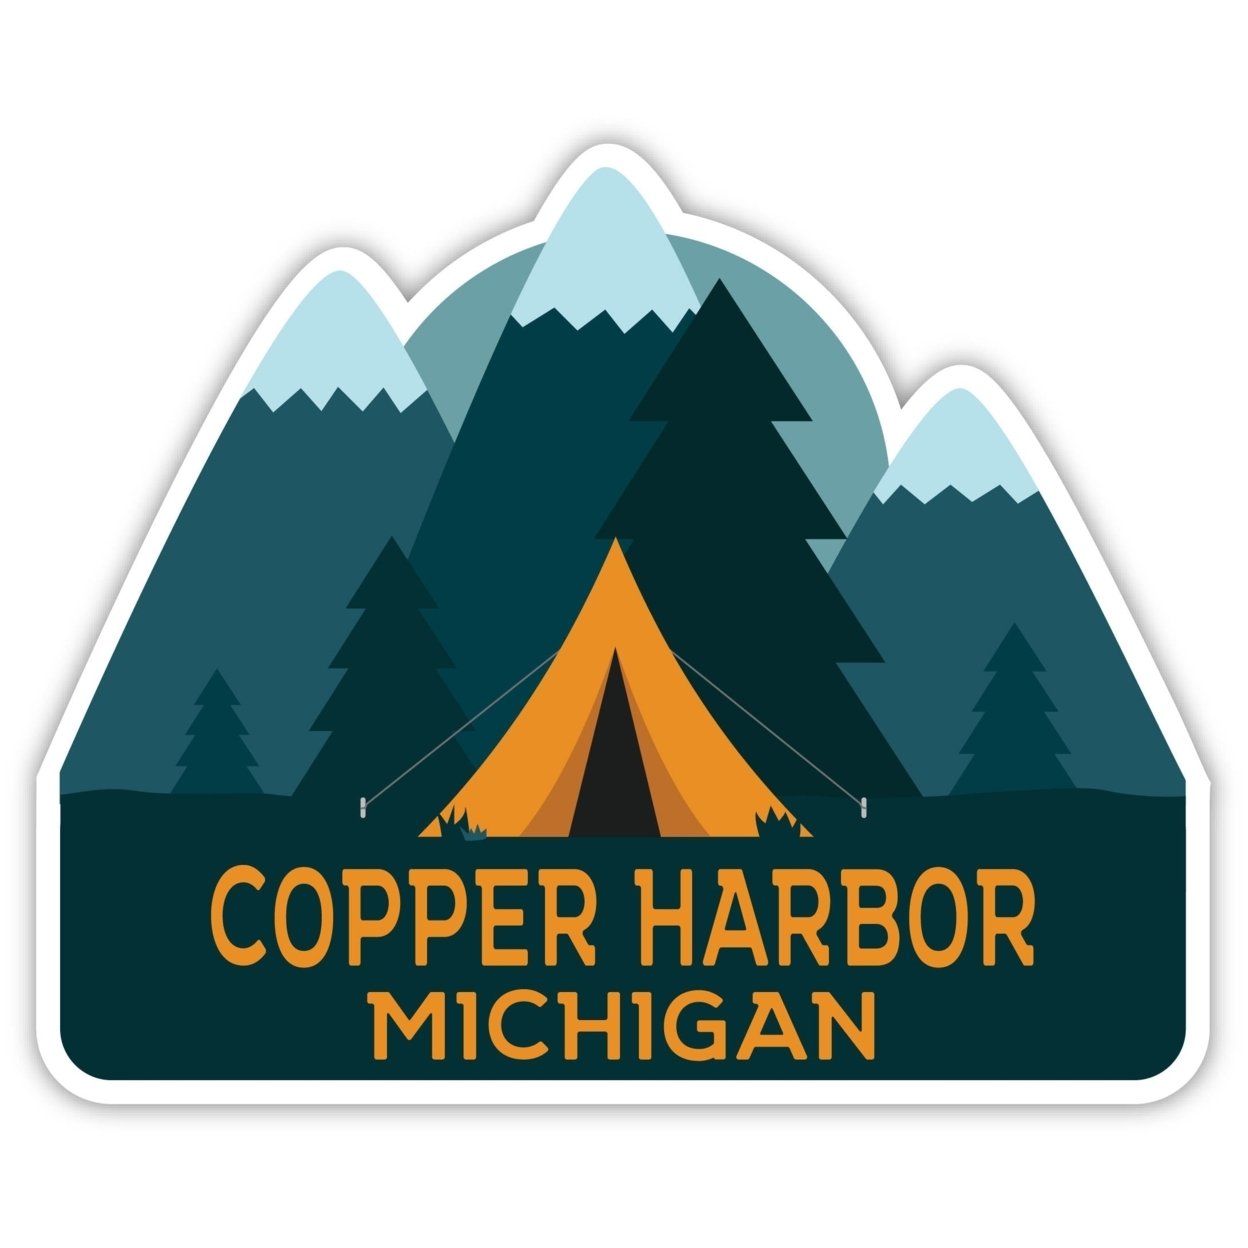 Copper Harbor Michigan Souvenir Decorative Stickers (Choose Theme And Size) - 4-Pack, 4-Inch, Adventures Awaits